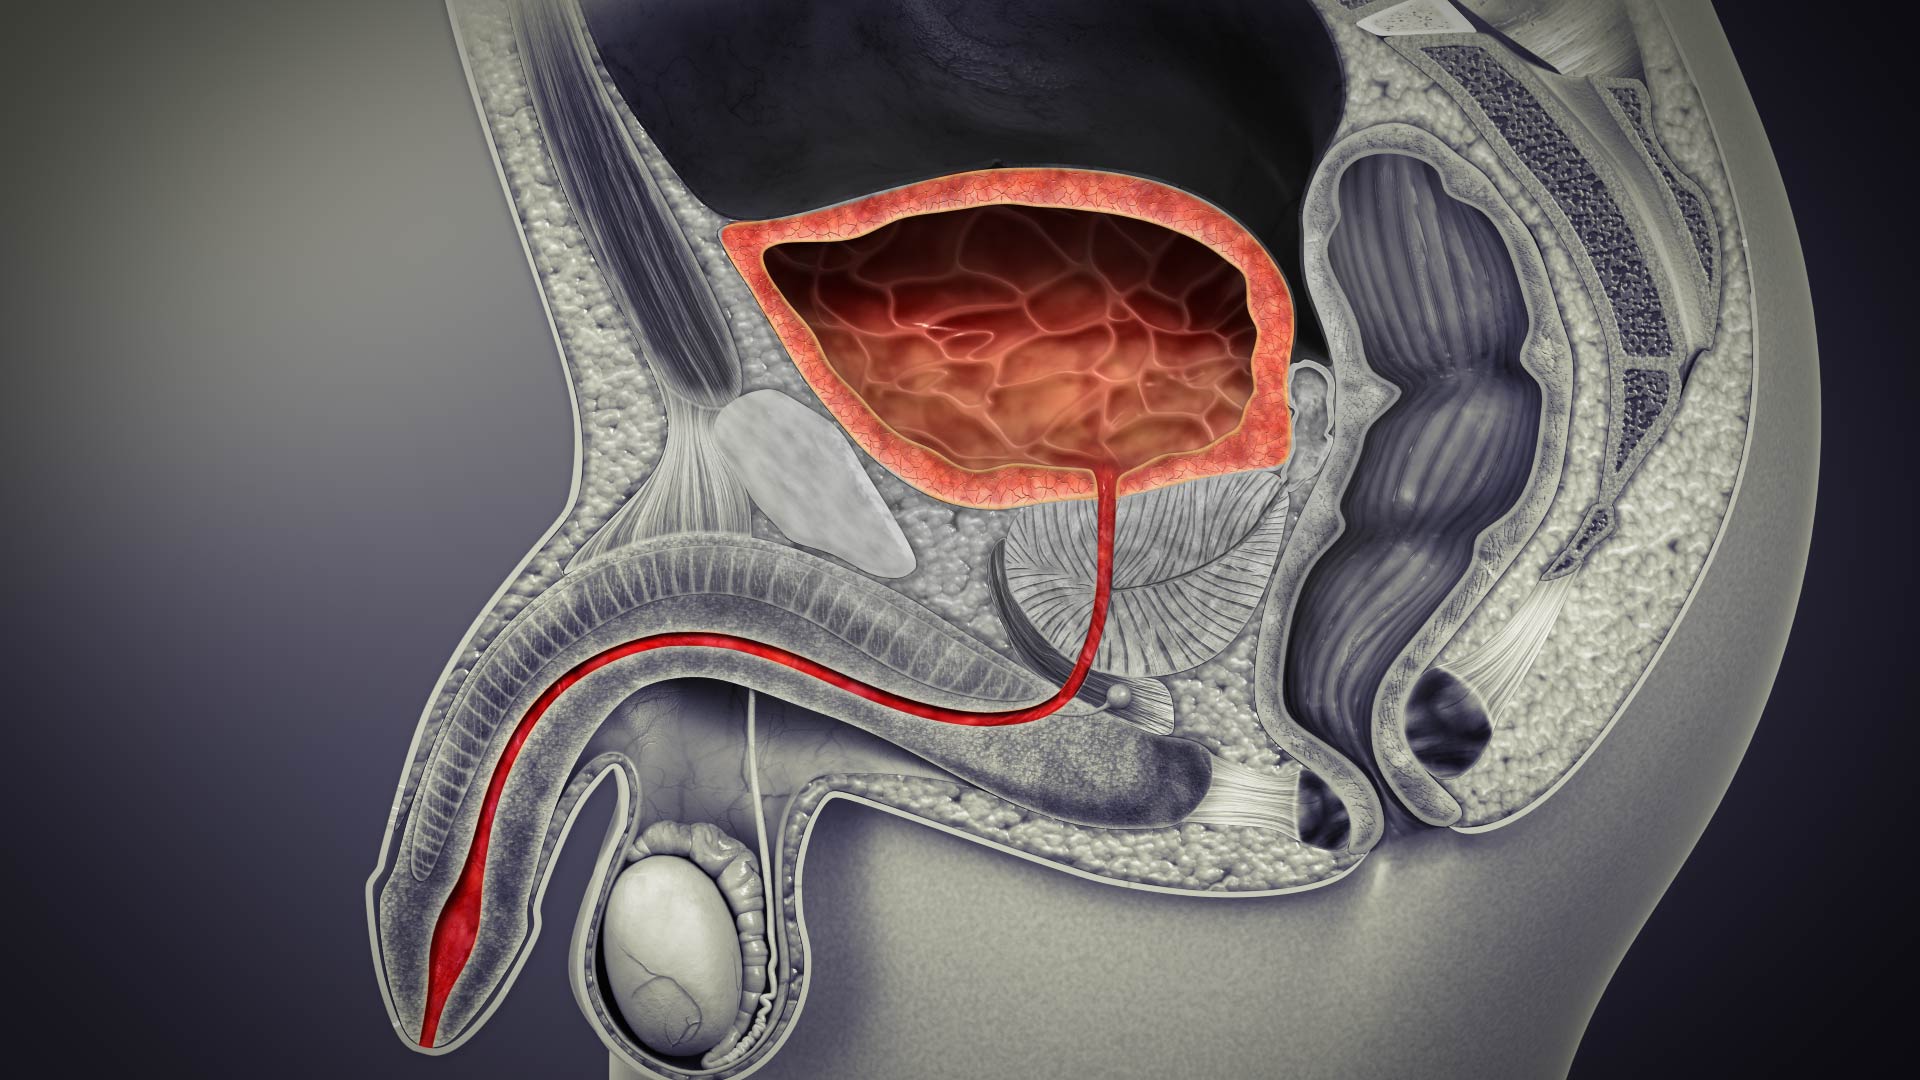 Anatomy, Functions and Conditions of Urinary Bladder